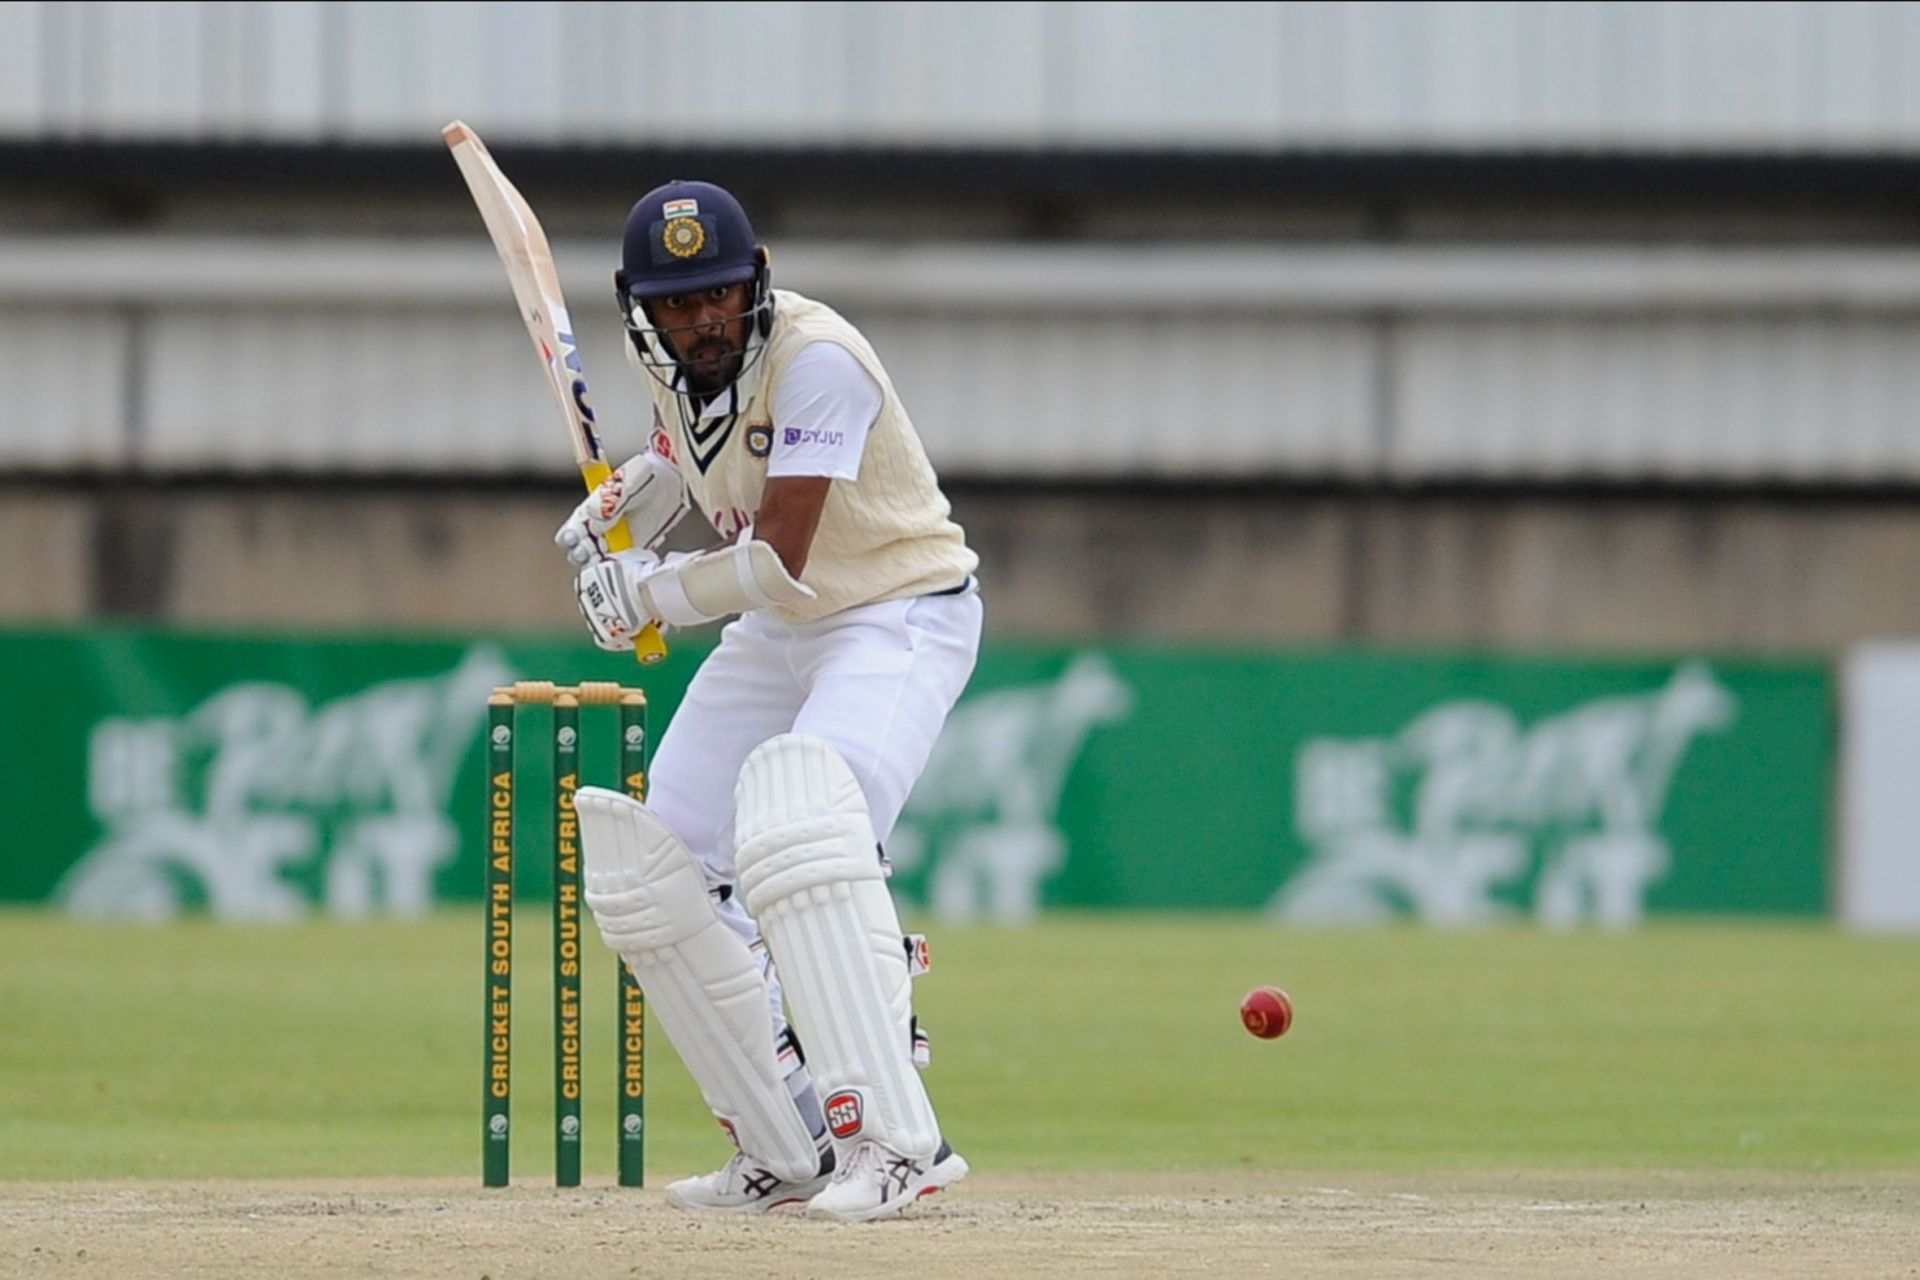 Abhimanyu Easwaran scored 55 off 117 balls in the fourth innings chase of the second Test before rain played spoilsport